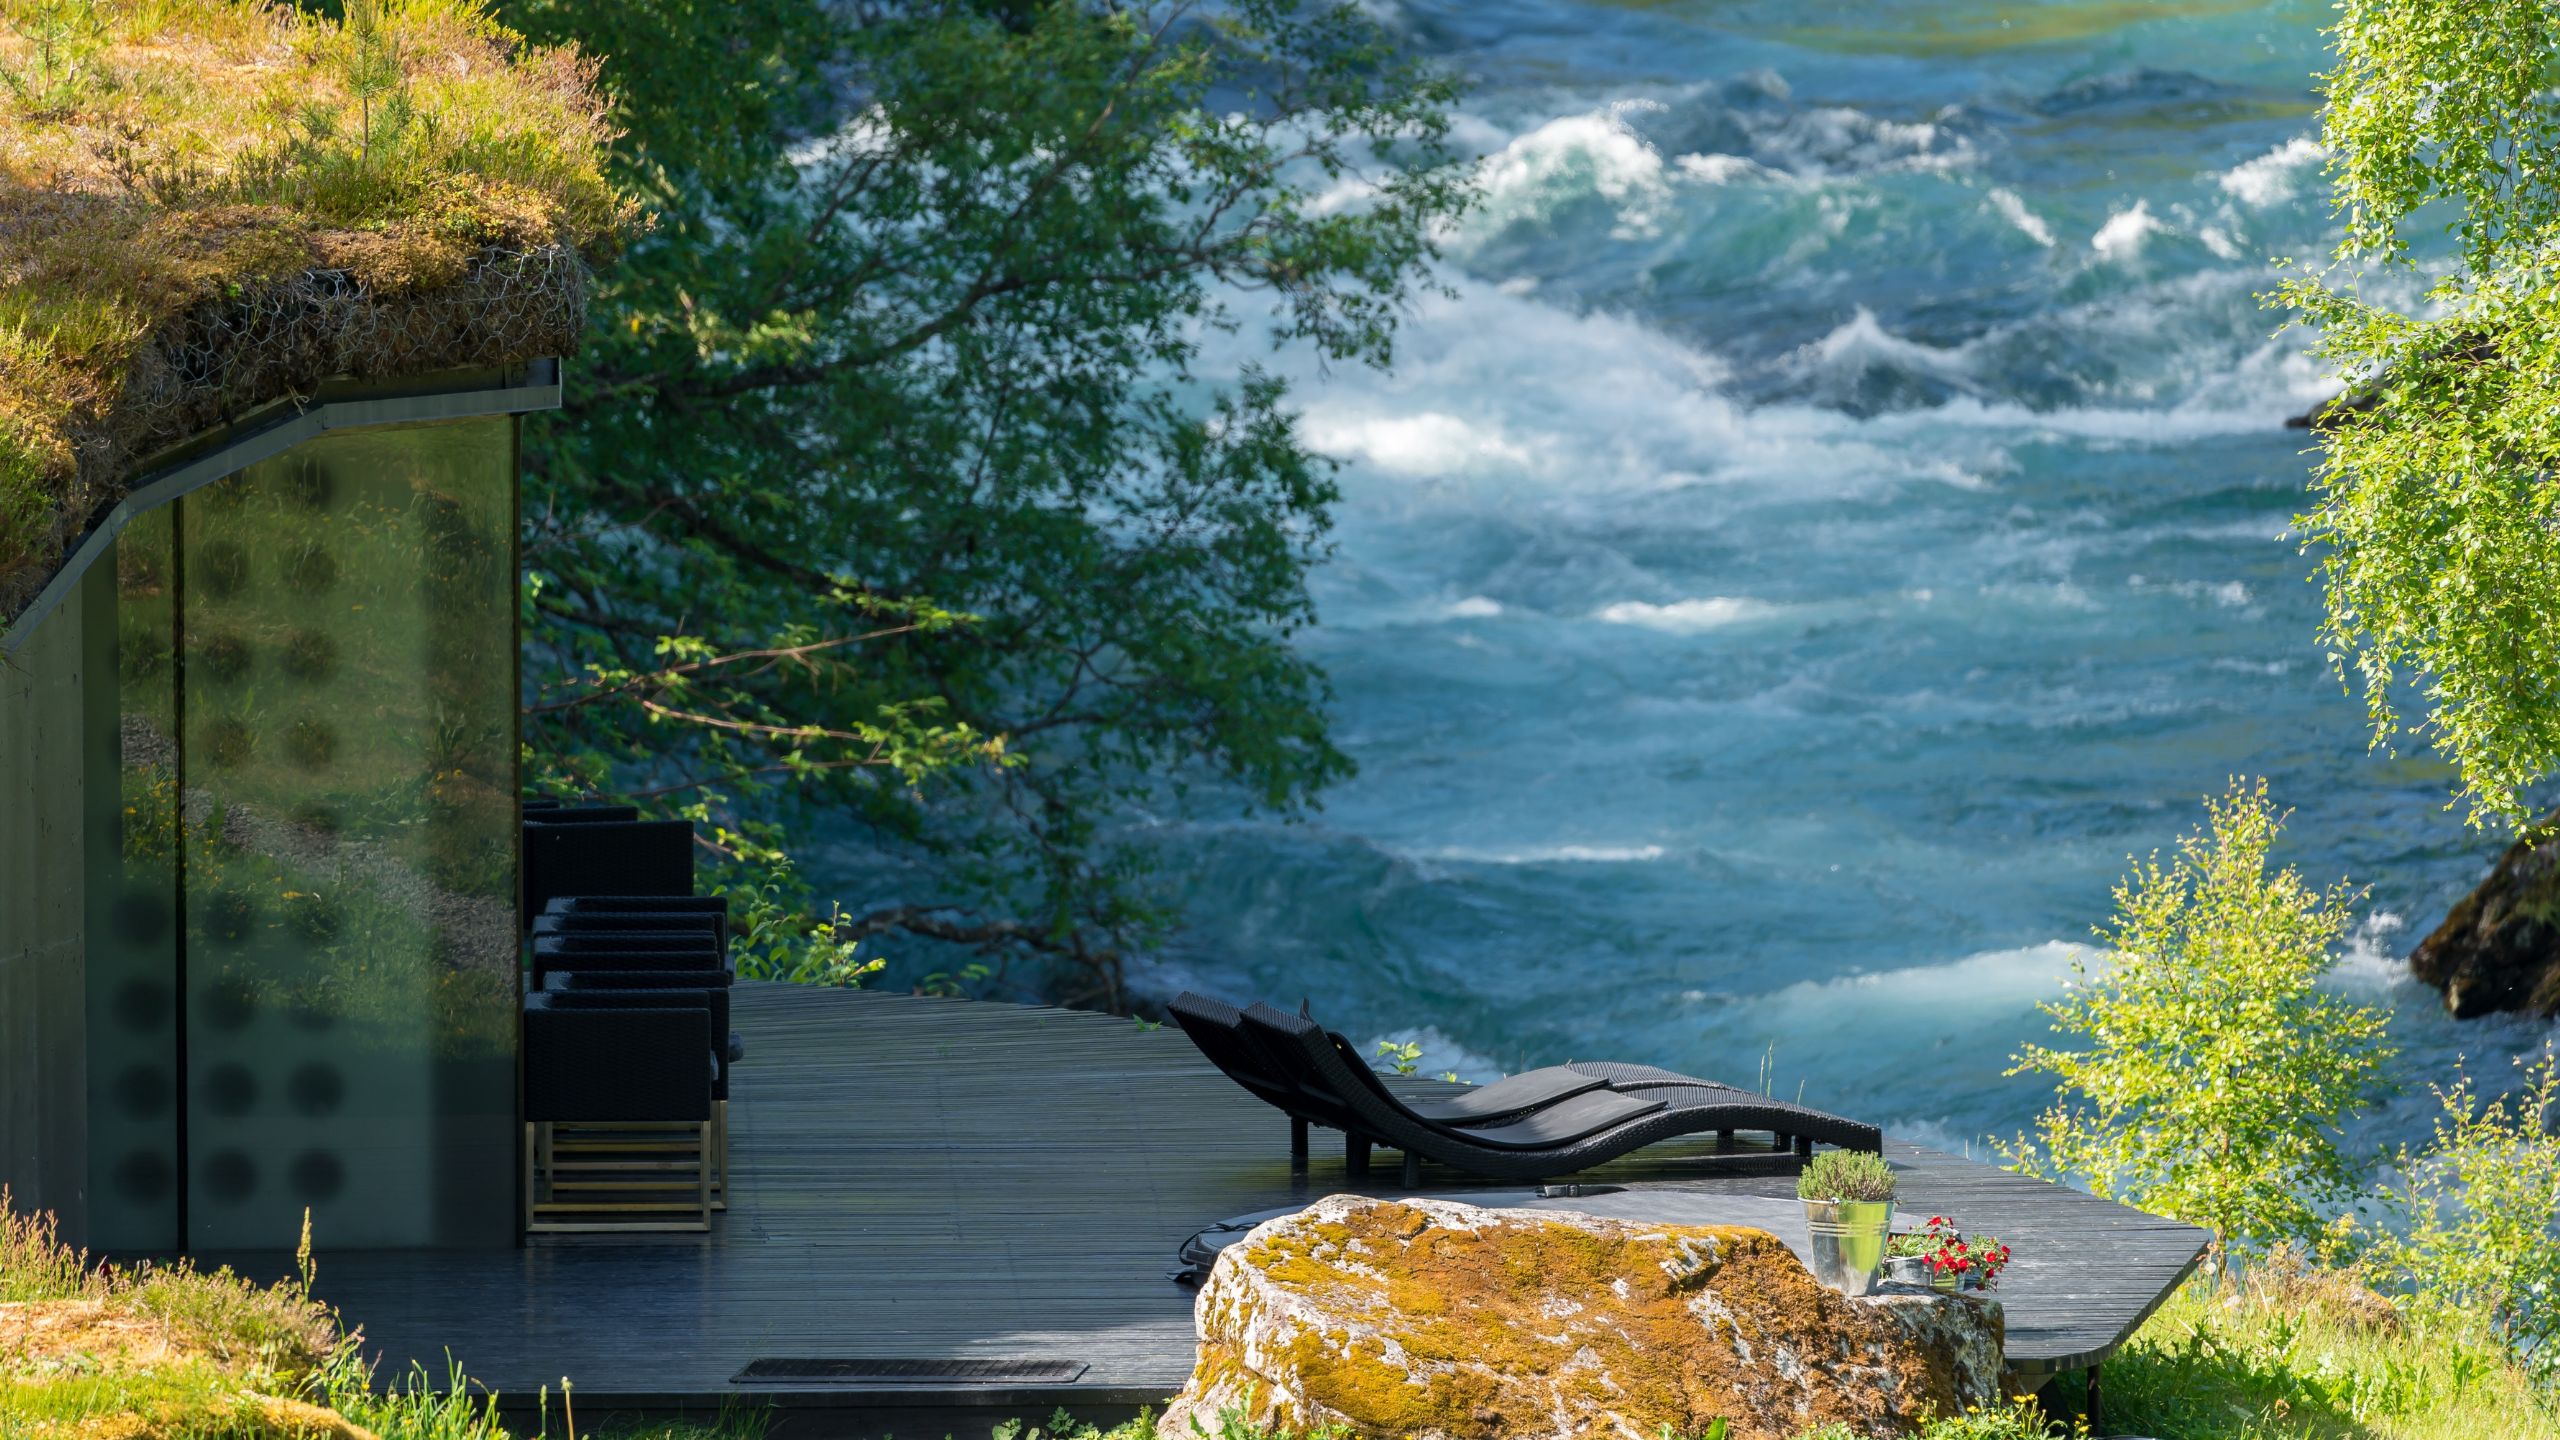 View from the Juvet Landscape Hotel in Norway. Photo: Arild Lilleboe / Shutterstock.com.